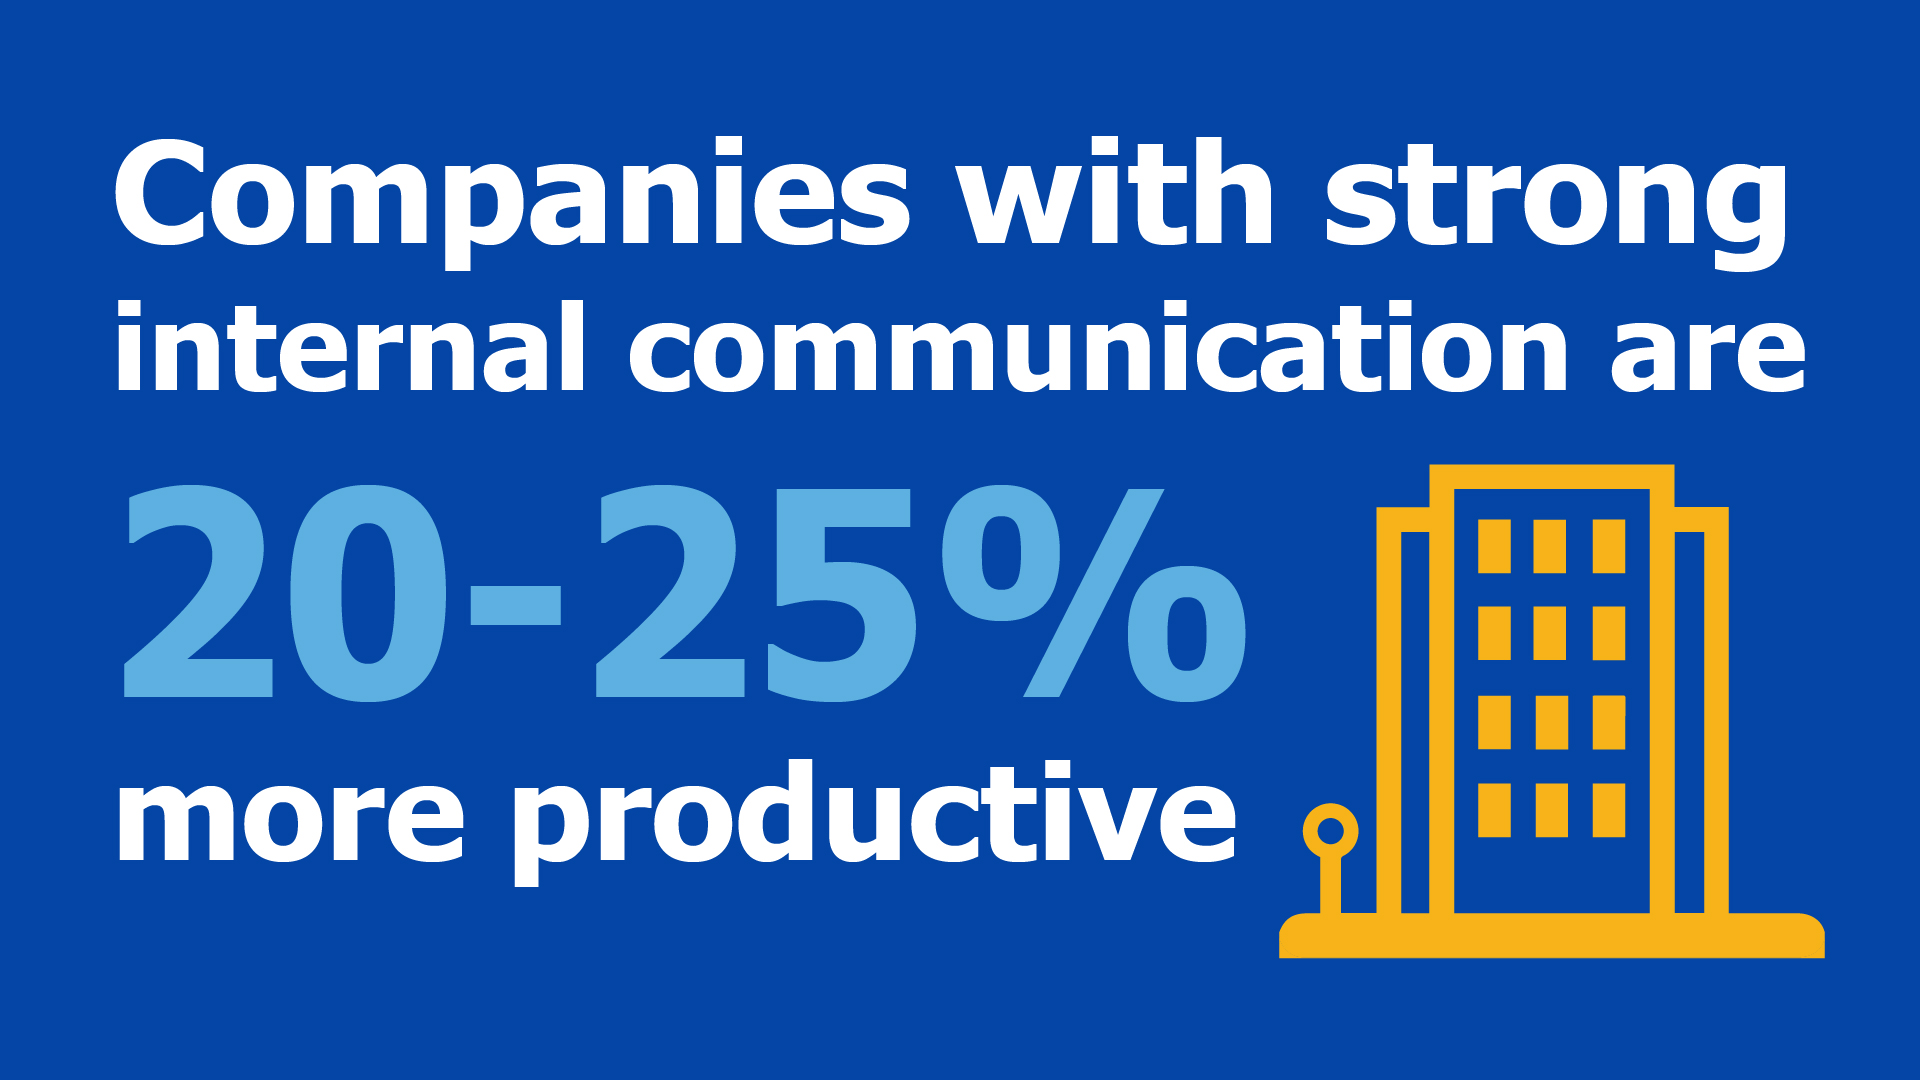 Companies with strong internal communication are 20-25% more productive.